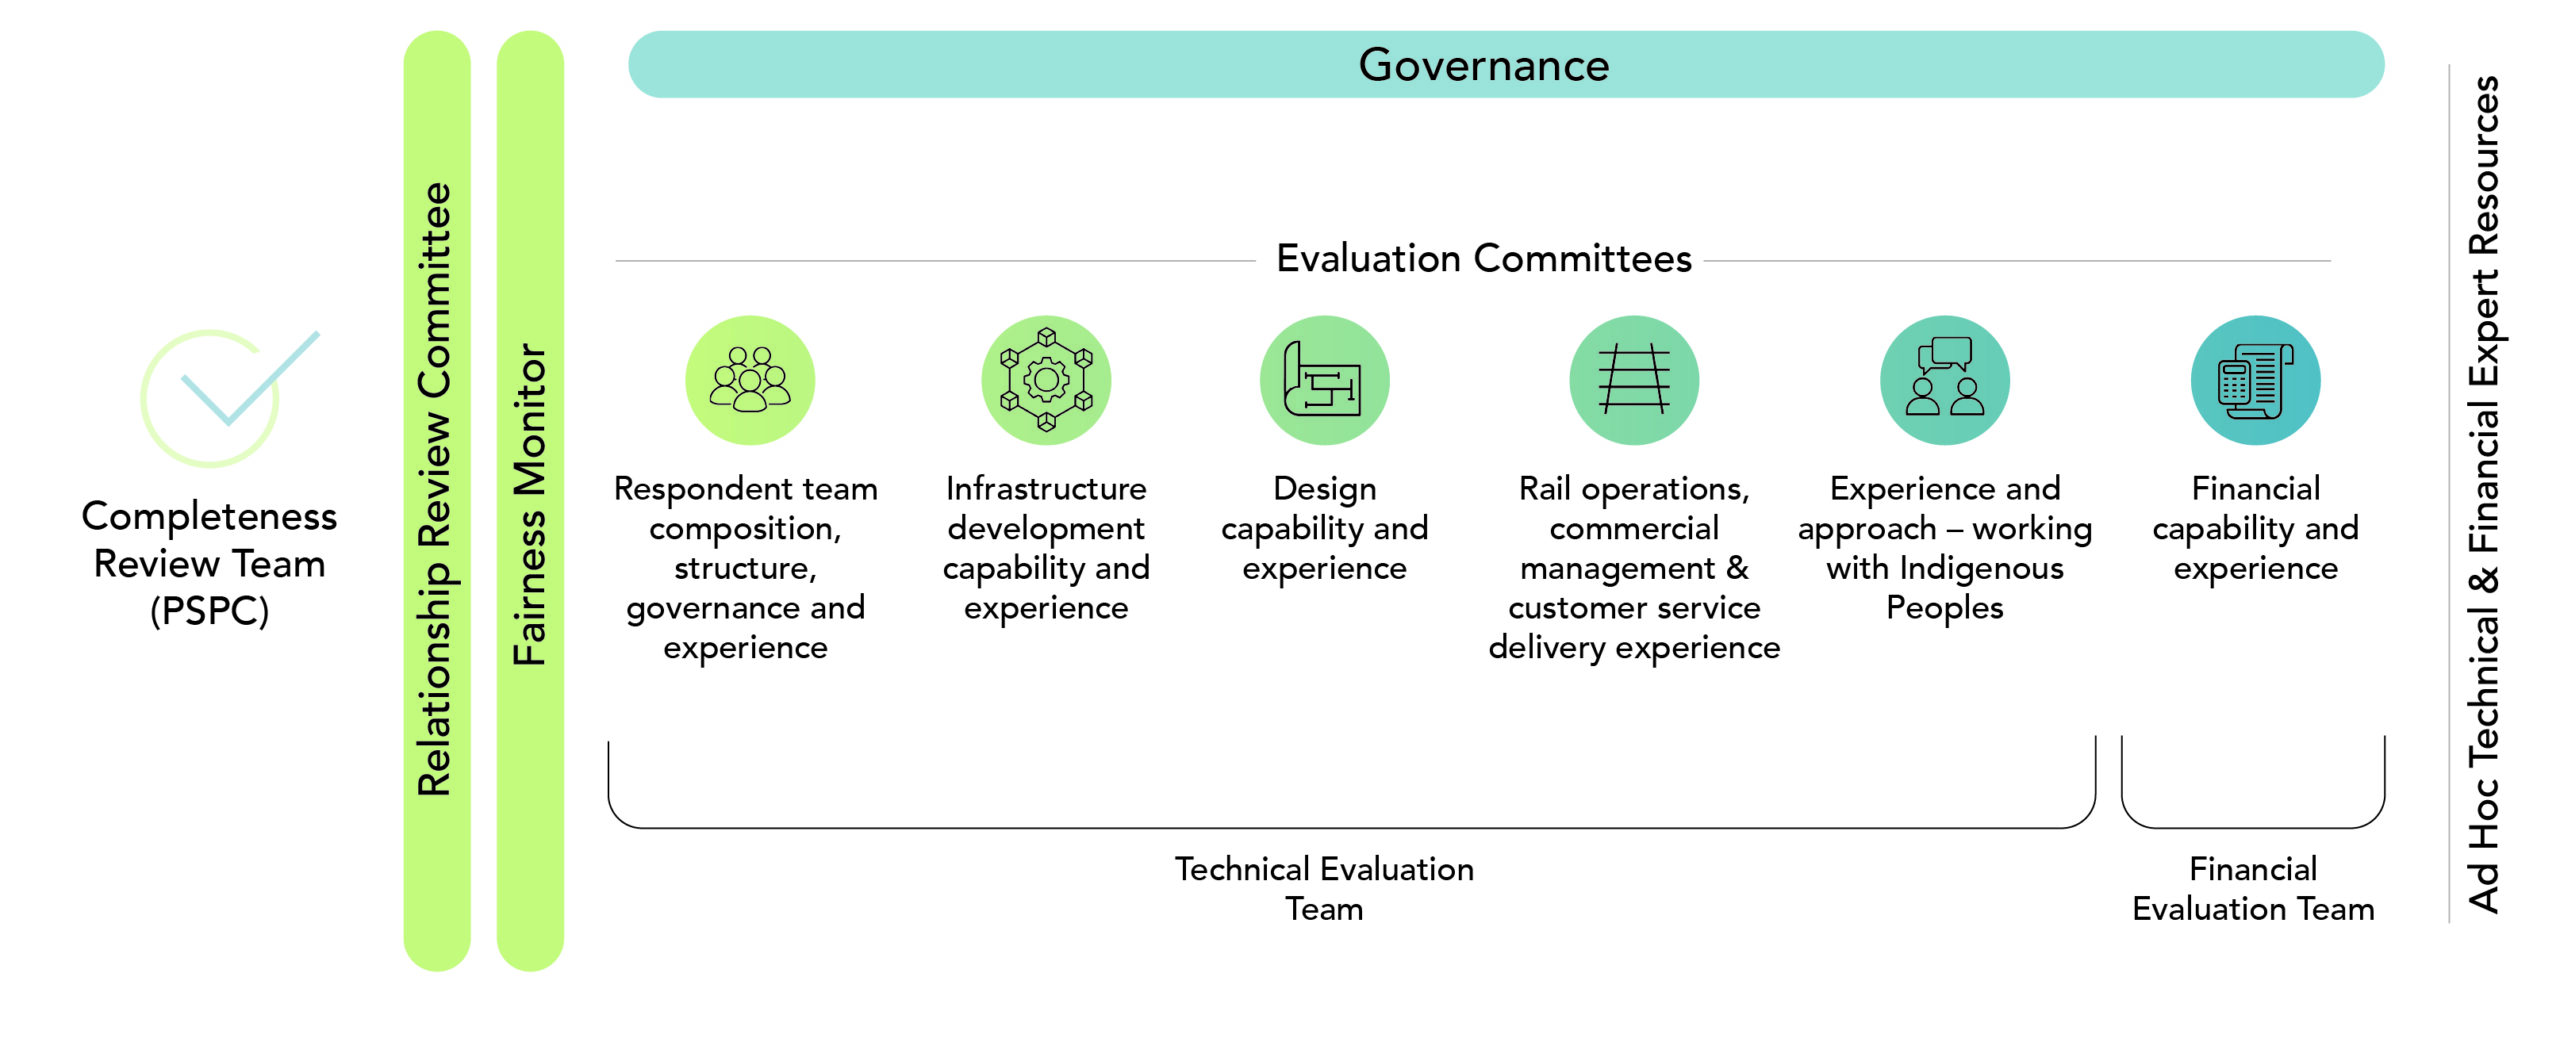 Graphic shows that six separate expert evaluation committees, one per package, evaluated each package. A Relationship Review Committee and a Fairness Monitor were involved.